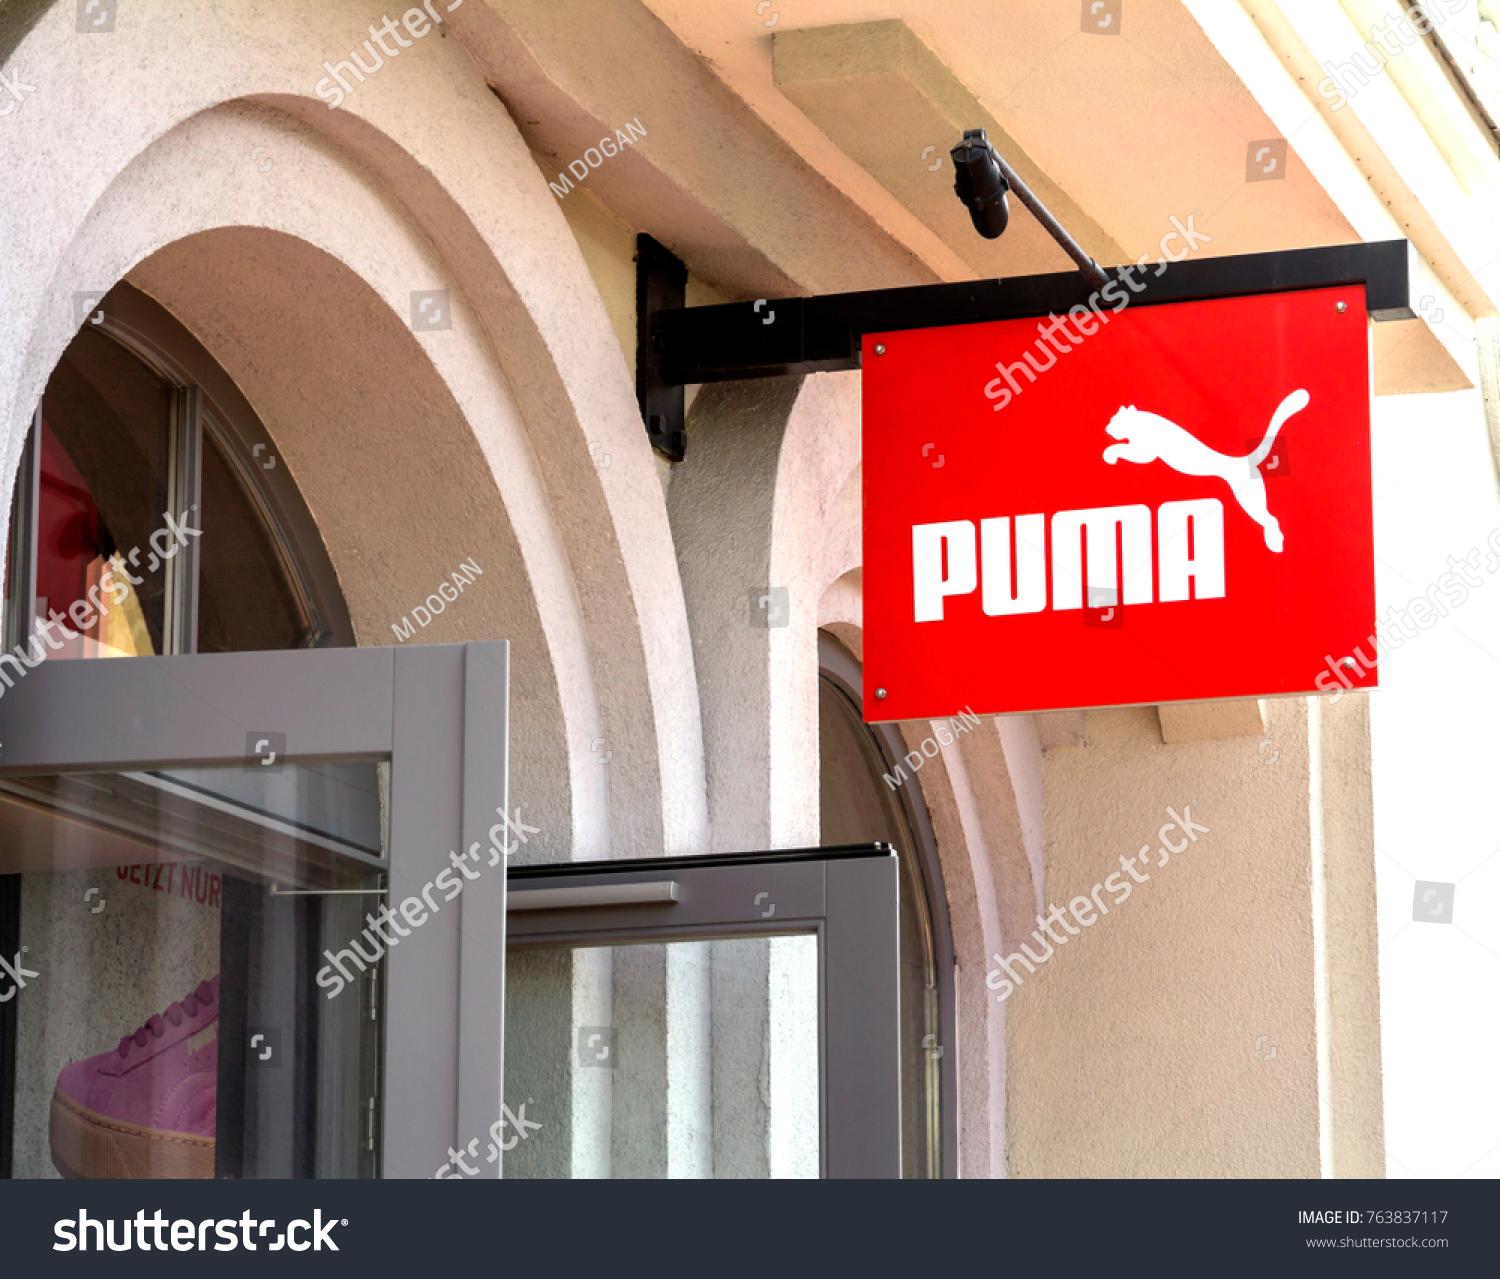 puma outlet germany